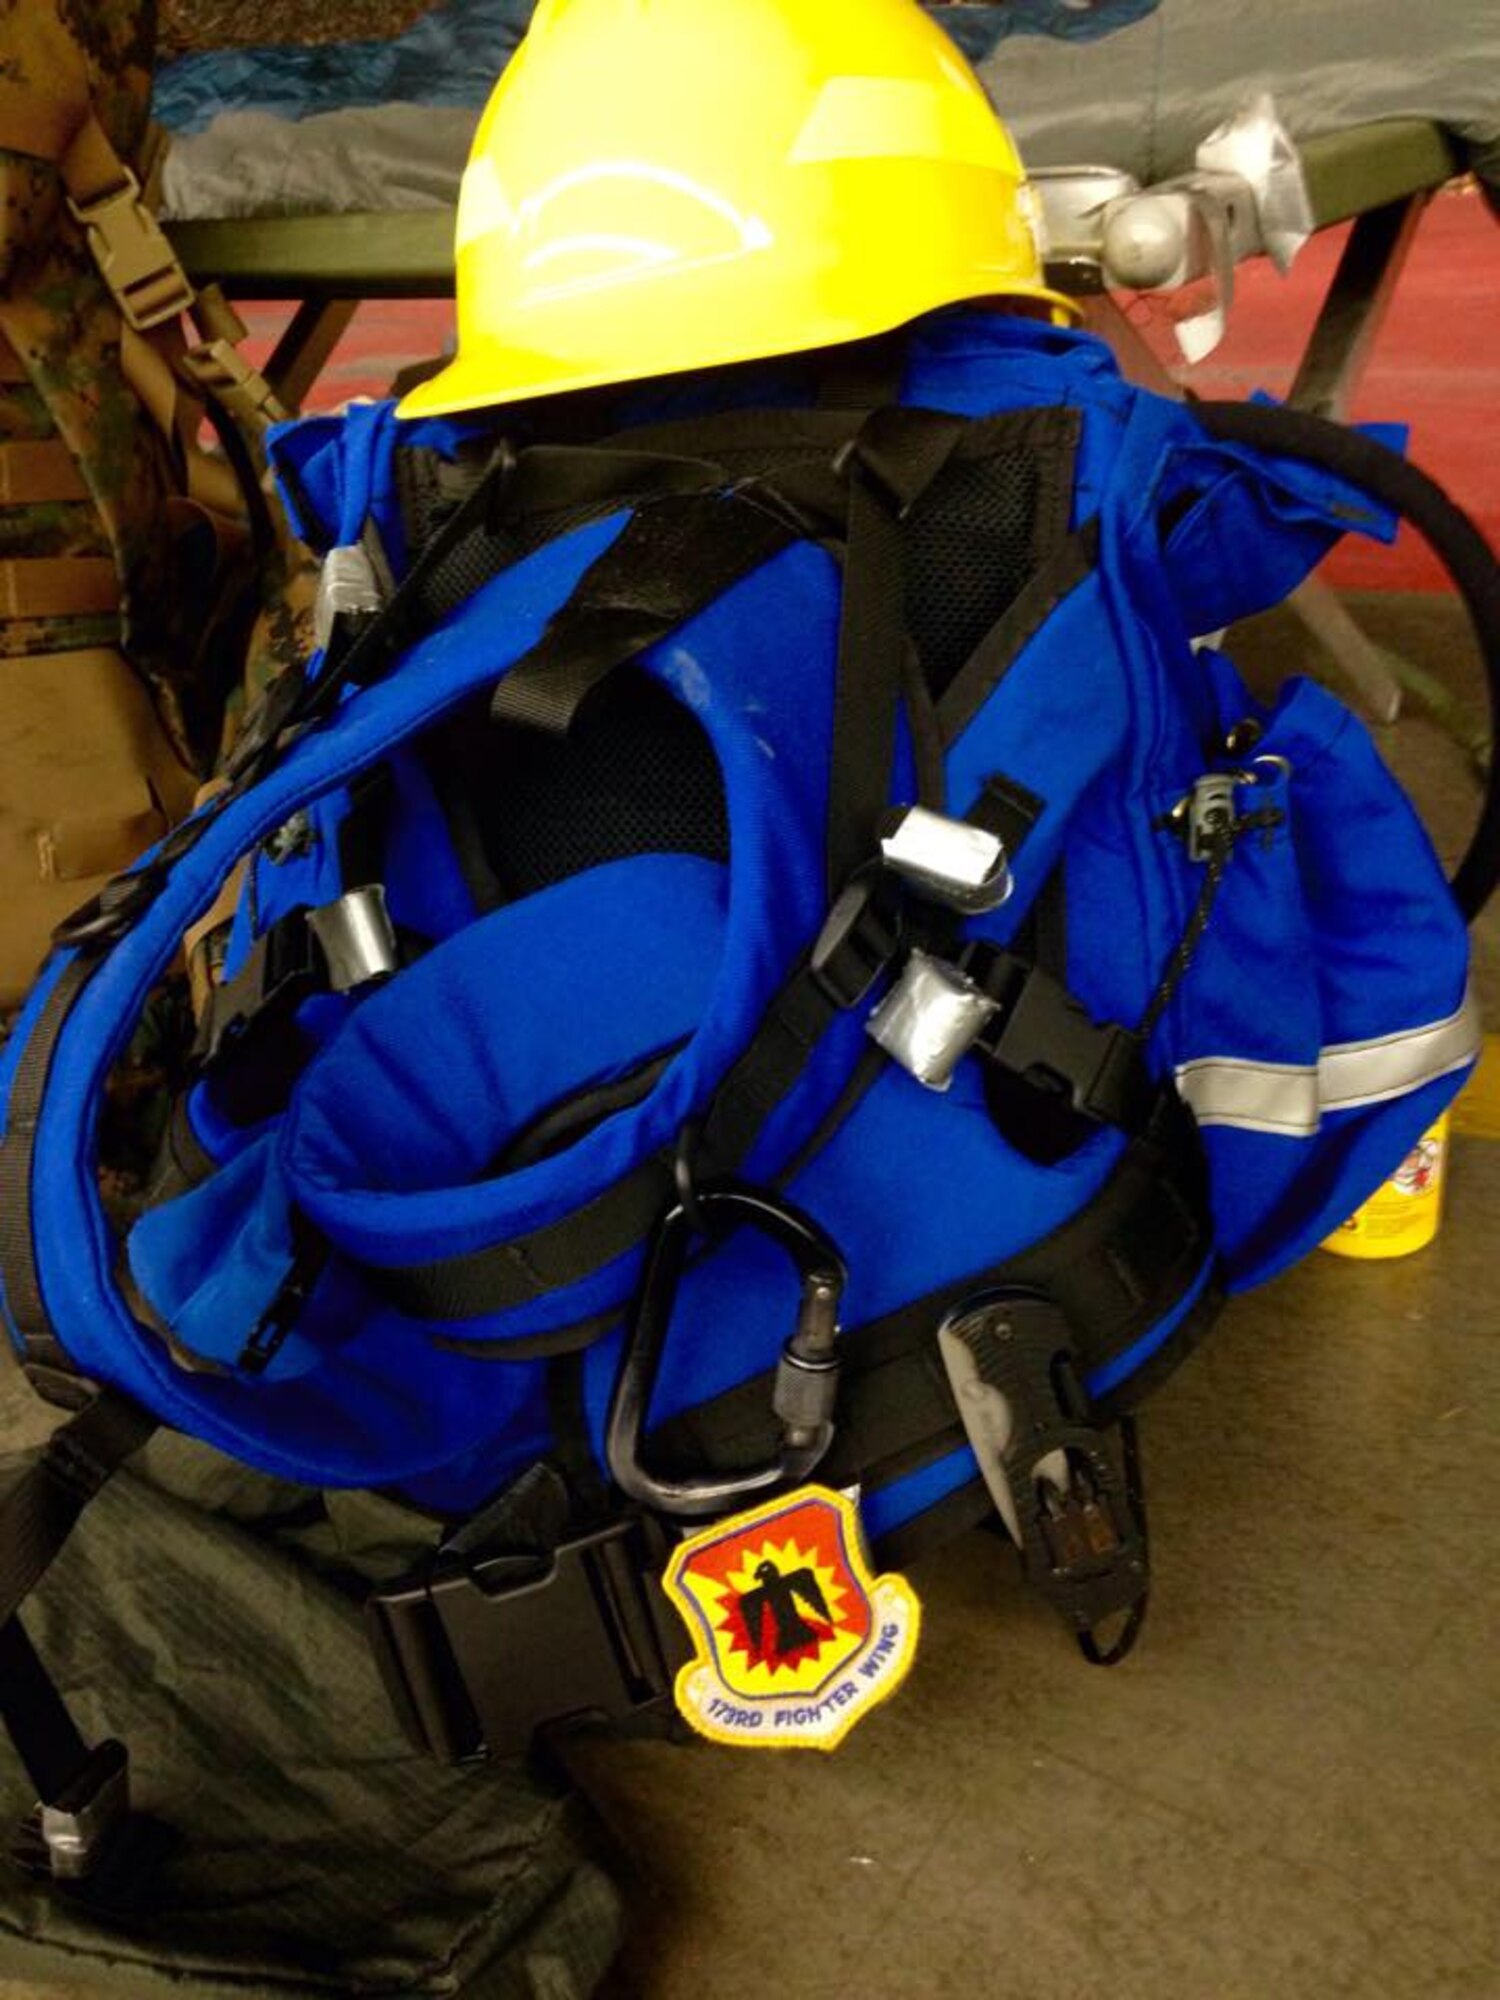 Pictured here is the equipment issued to the volunteer Airmen from the 173rd Fighter Wing who are assisting with wild land firefighting efforts across the state of Oregon August 27, 2015.  Fifty-five Airmen from Kingsley Field in Klamath Falls, Oregon were voluntarily activated by Governor Kate Brown as fires spread across the state.  (U.S. Air National Guard photo by 1st Lieutenant Adrian Mateos/released)